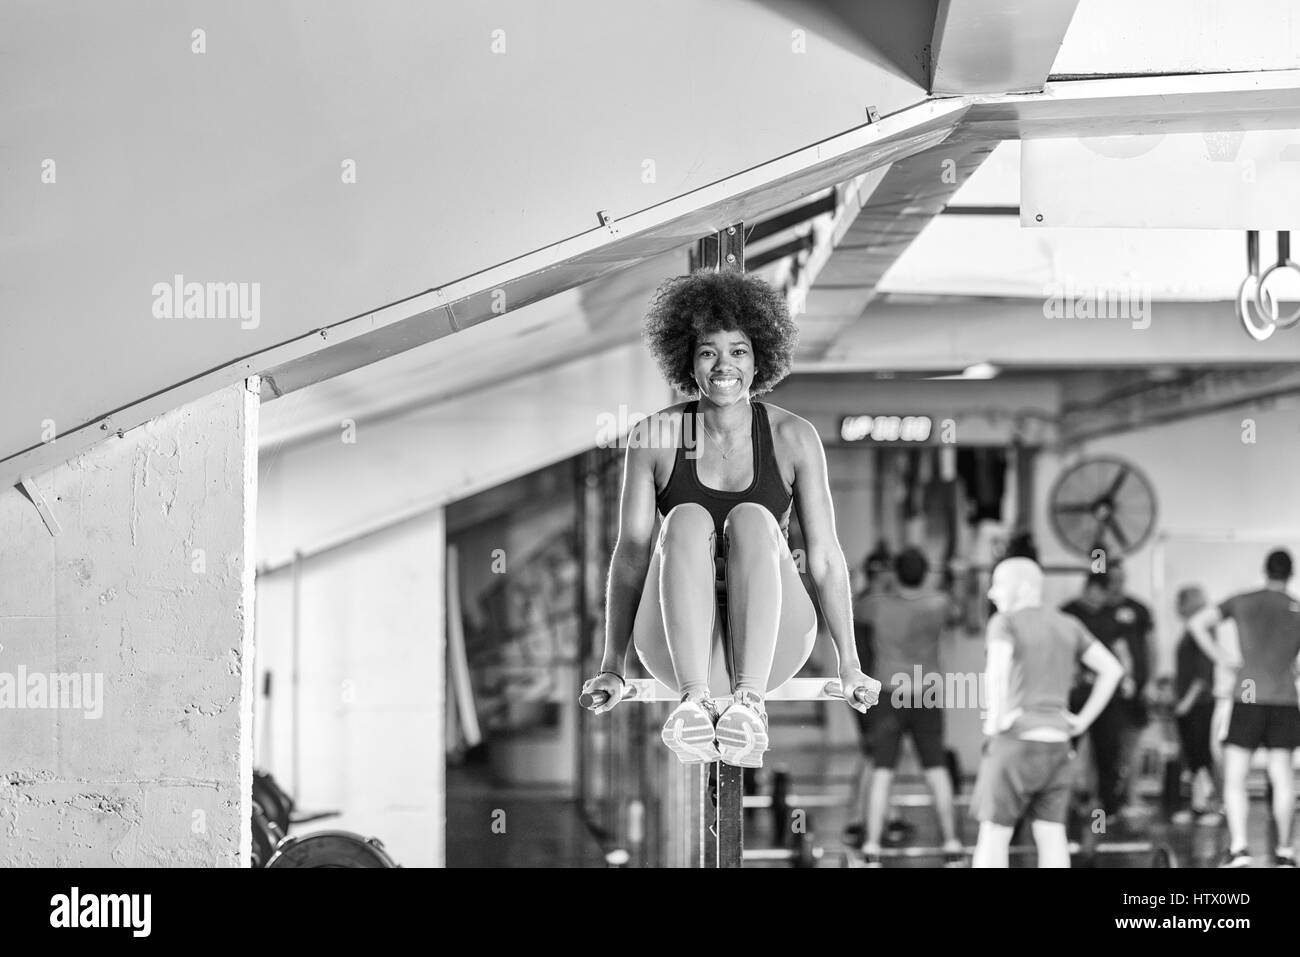 african american athlete woman workout out arms on dips horizontal parallel bars Exercise training triceps and biceps doing push ups Stock Photo